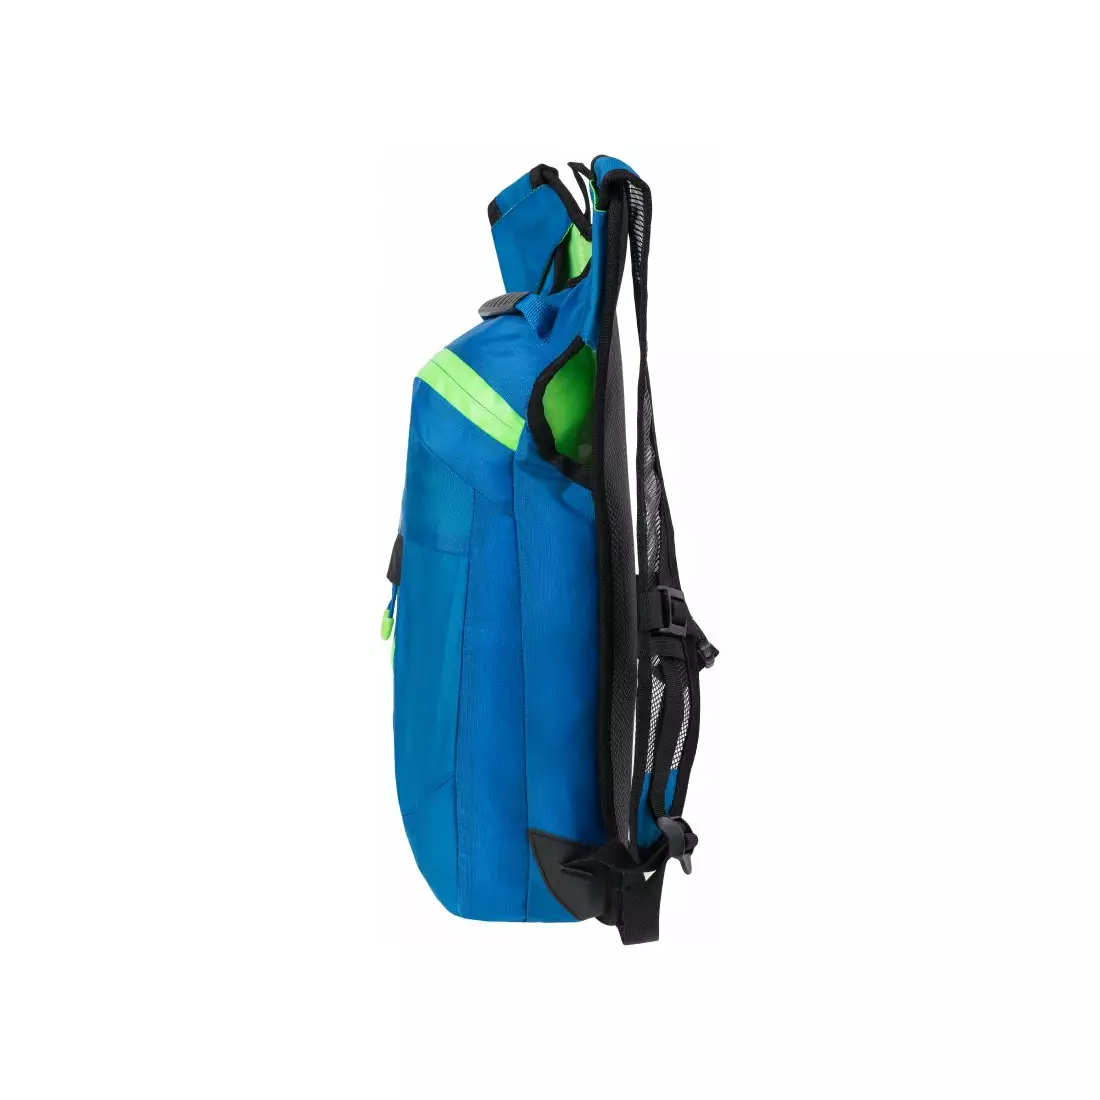 4F PCR001 bicycle backpack, blue